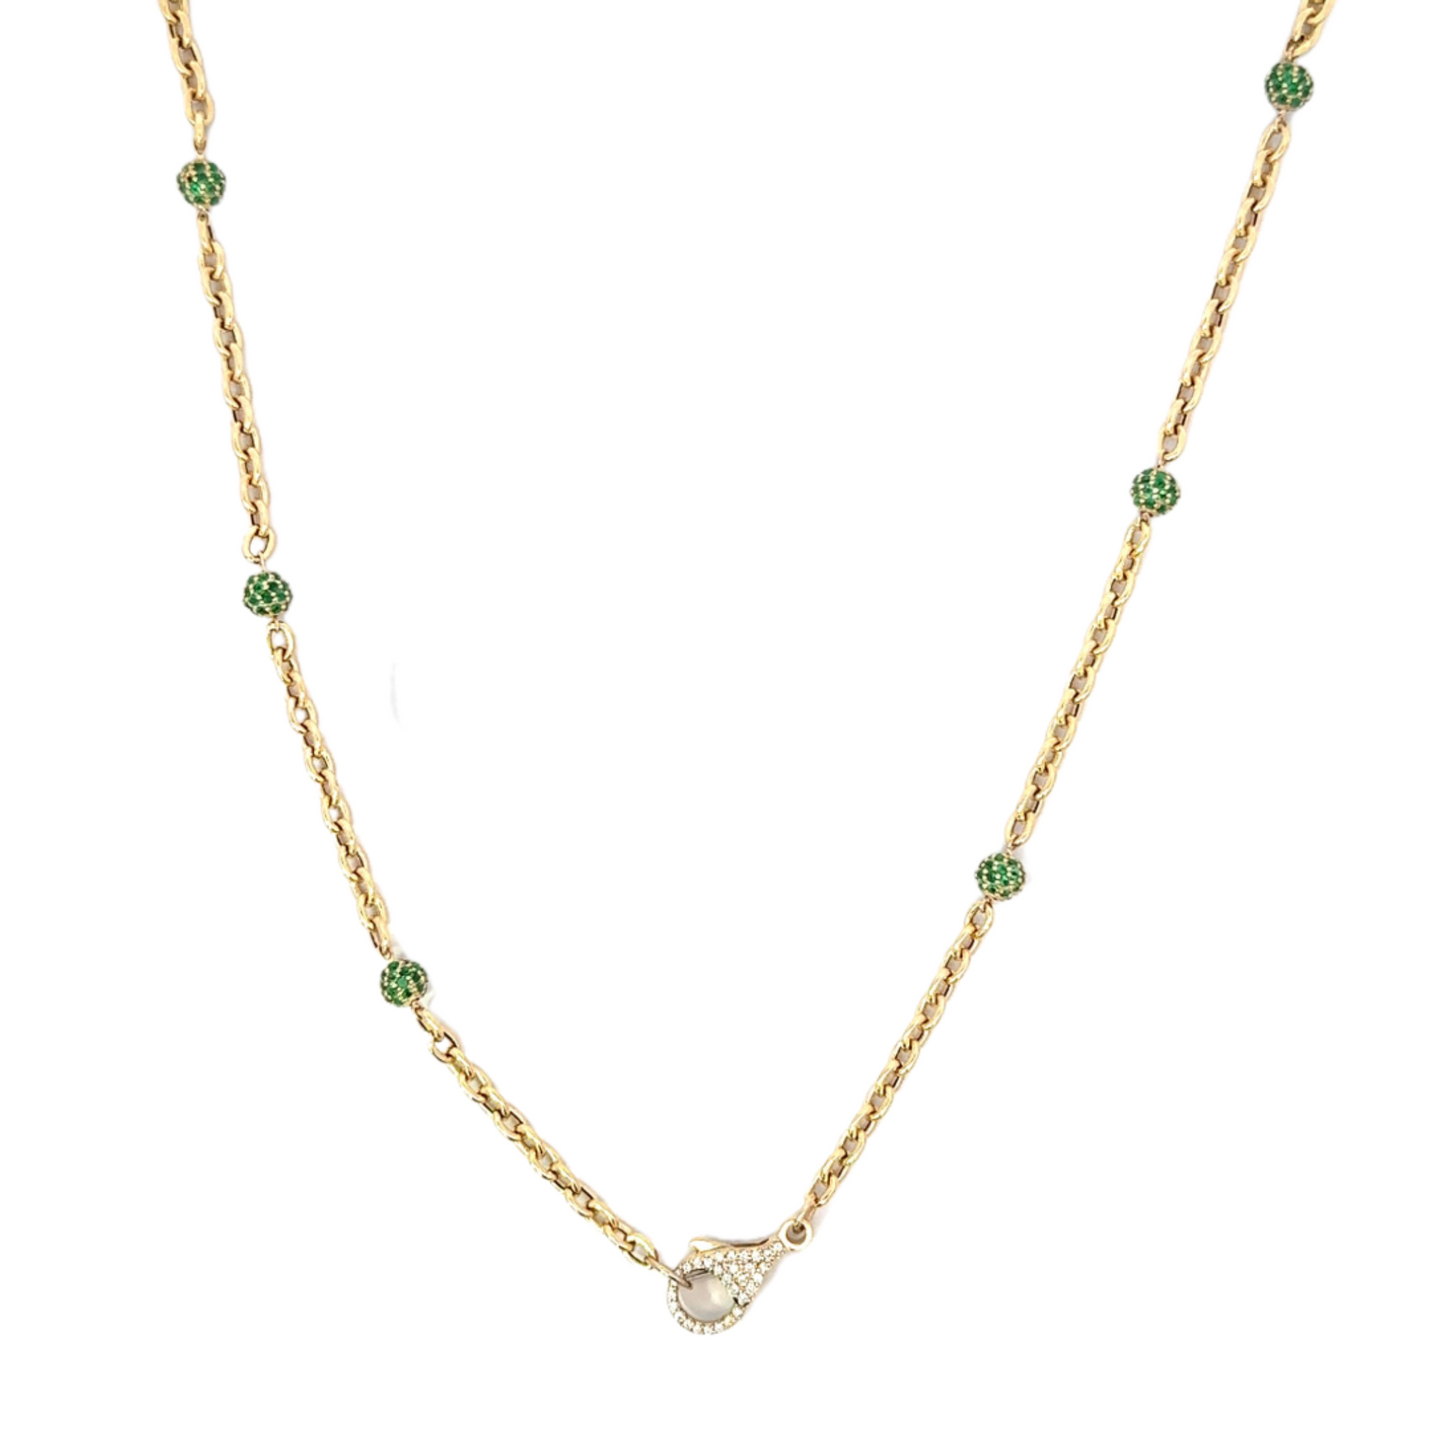 Yellow Gold Oval Link Necklace with Emerald Bead Accents and Tiny Pave Lobster